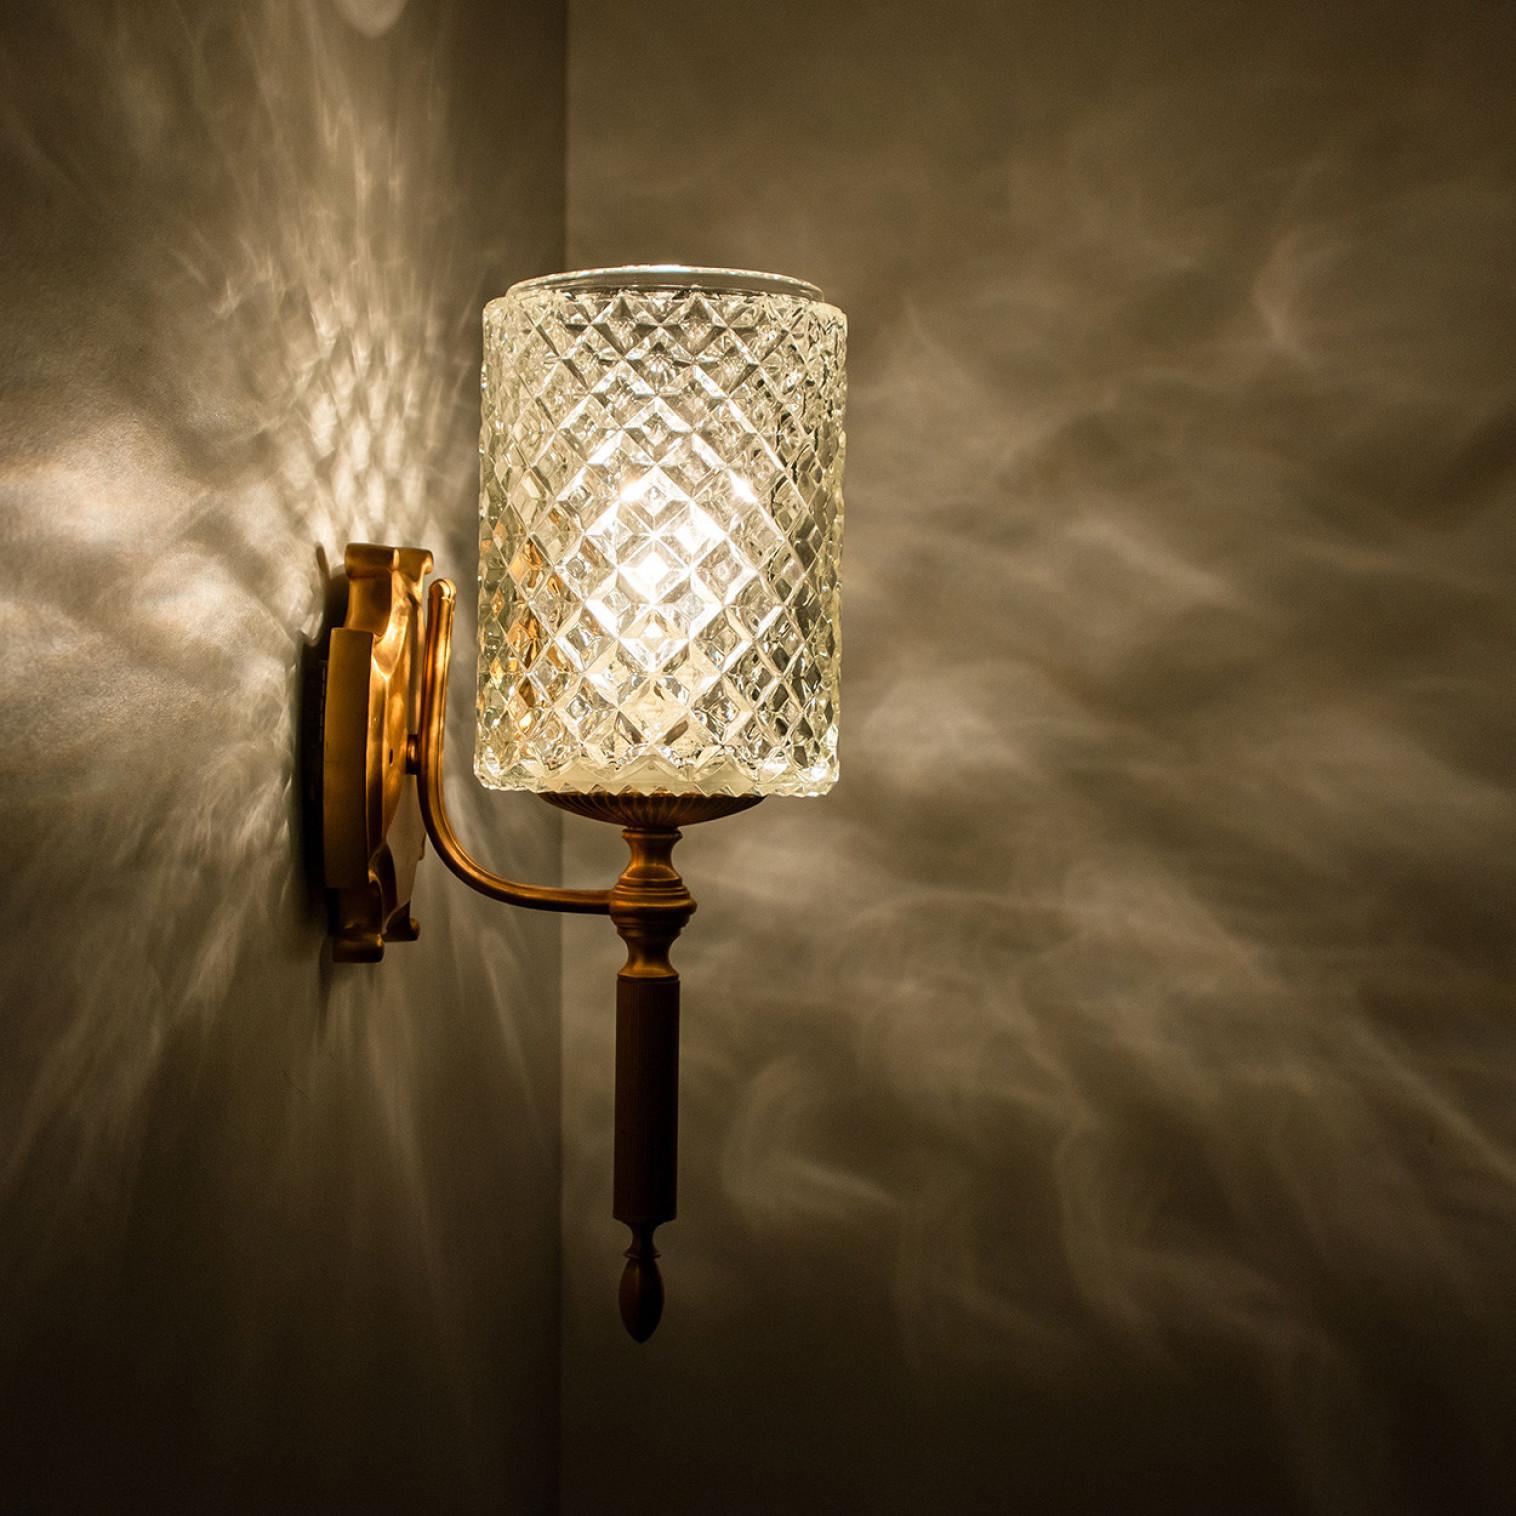 Textured Glass and Brass Wall Lights, Germany, 1960s For Sale 10